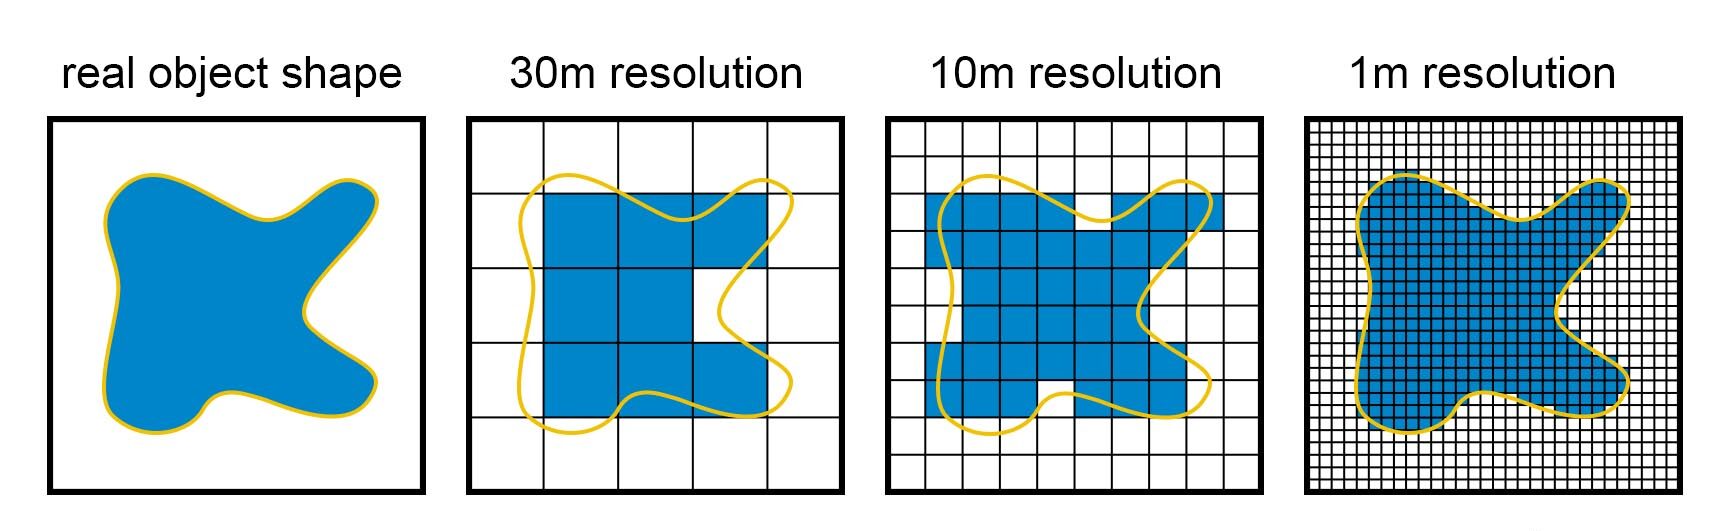 Diagram of satellite image resolutions comparing real object shape to 30 metre, 10 metre, and 1 metre resolution images. The diagram explains that as the resolution of a satellite image increases the image will more accurately represent the true shape of an object.